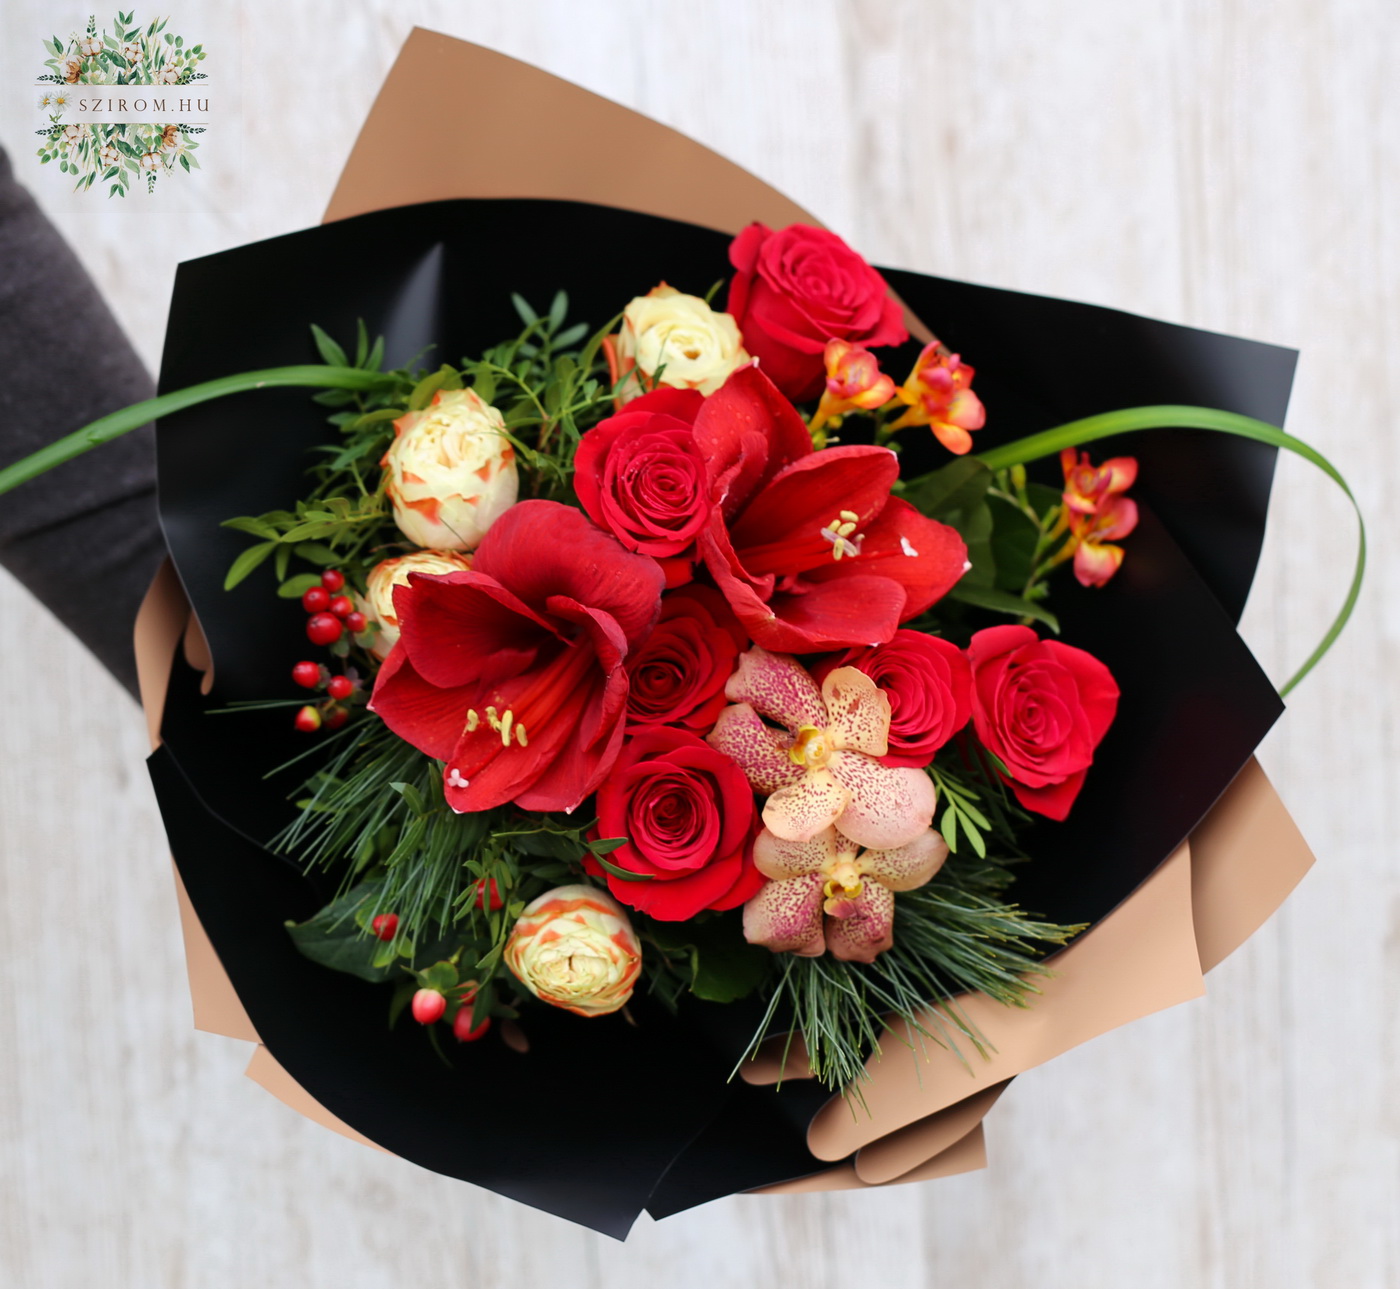 flower delivery Budapest - Rose bouquet with amaryllis and vanda orchids (15 stems)